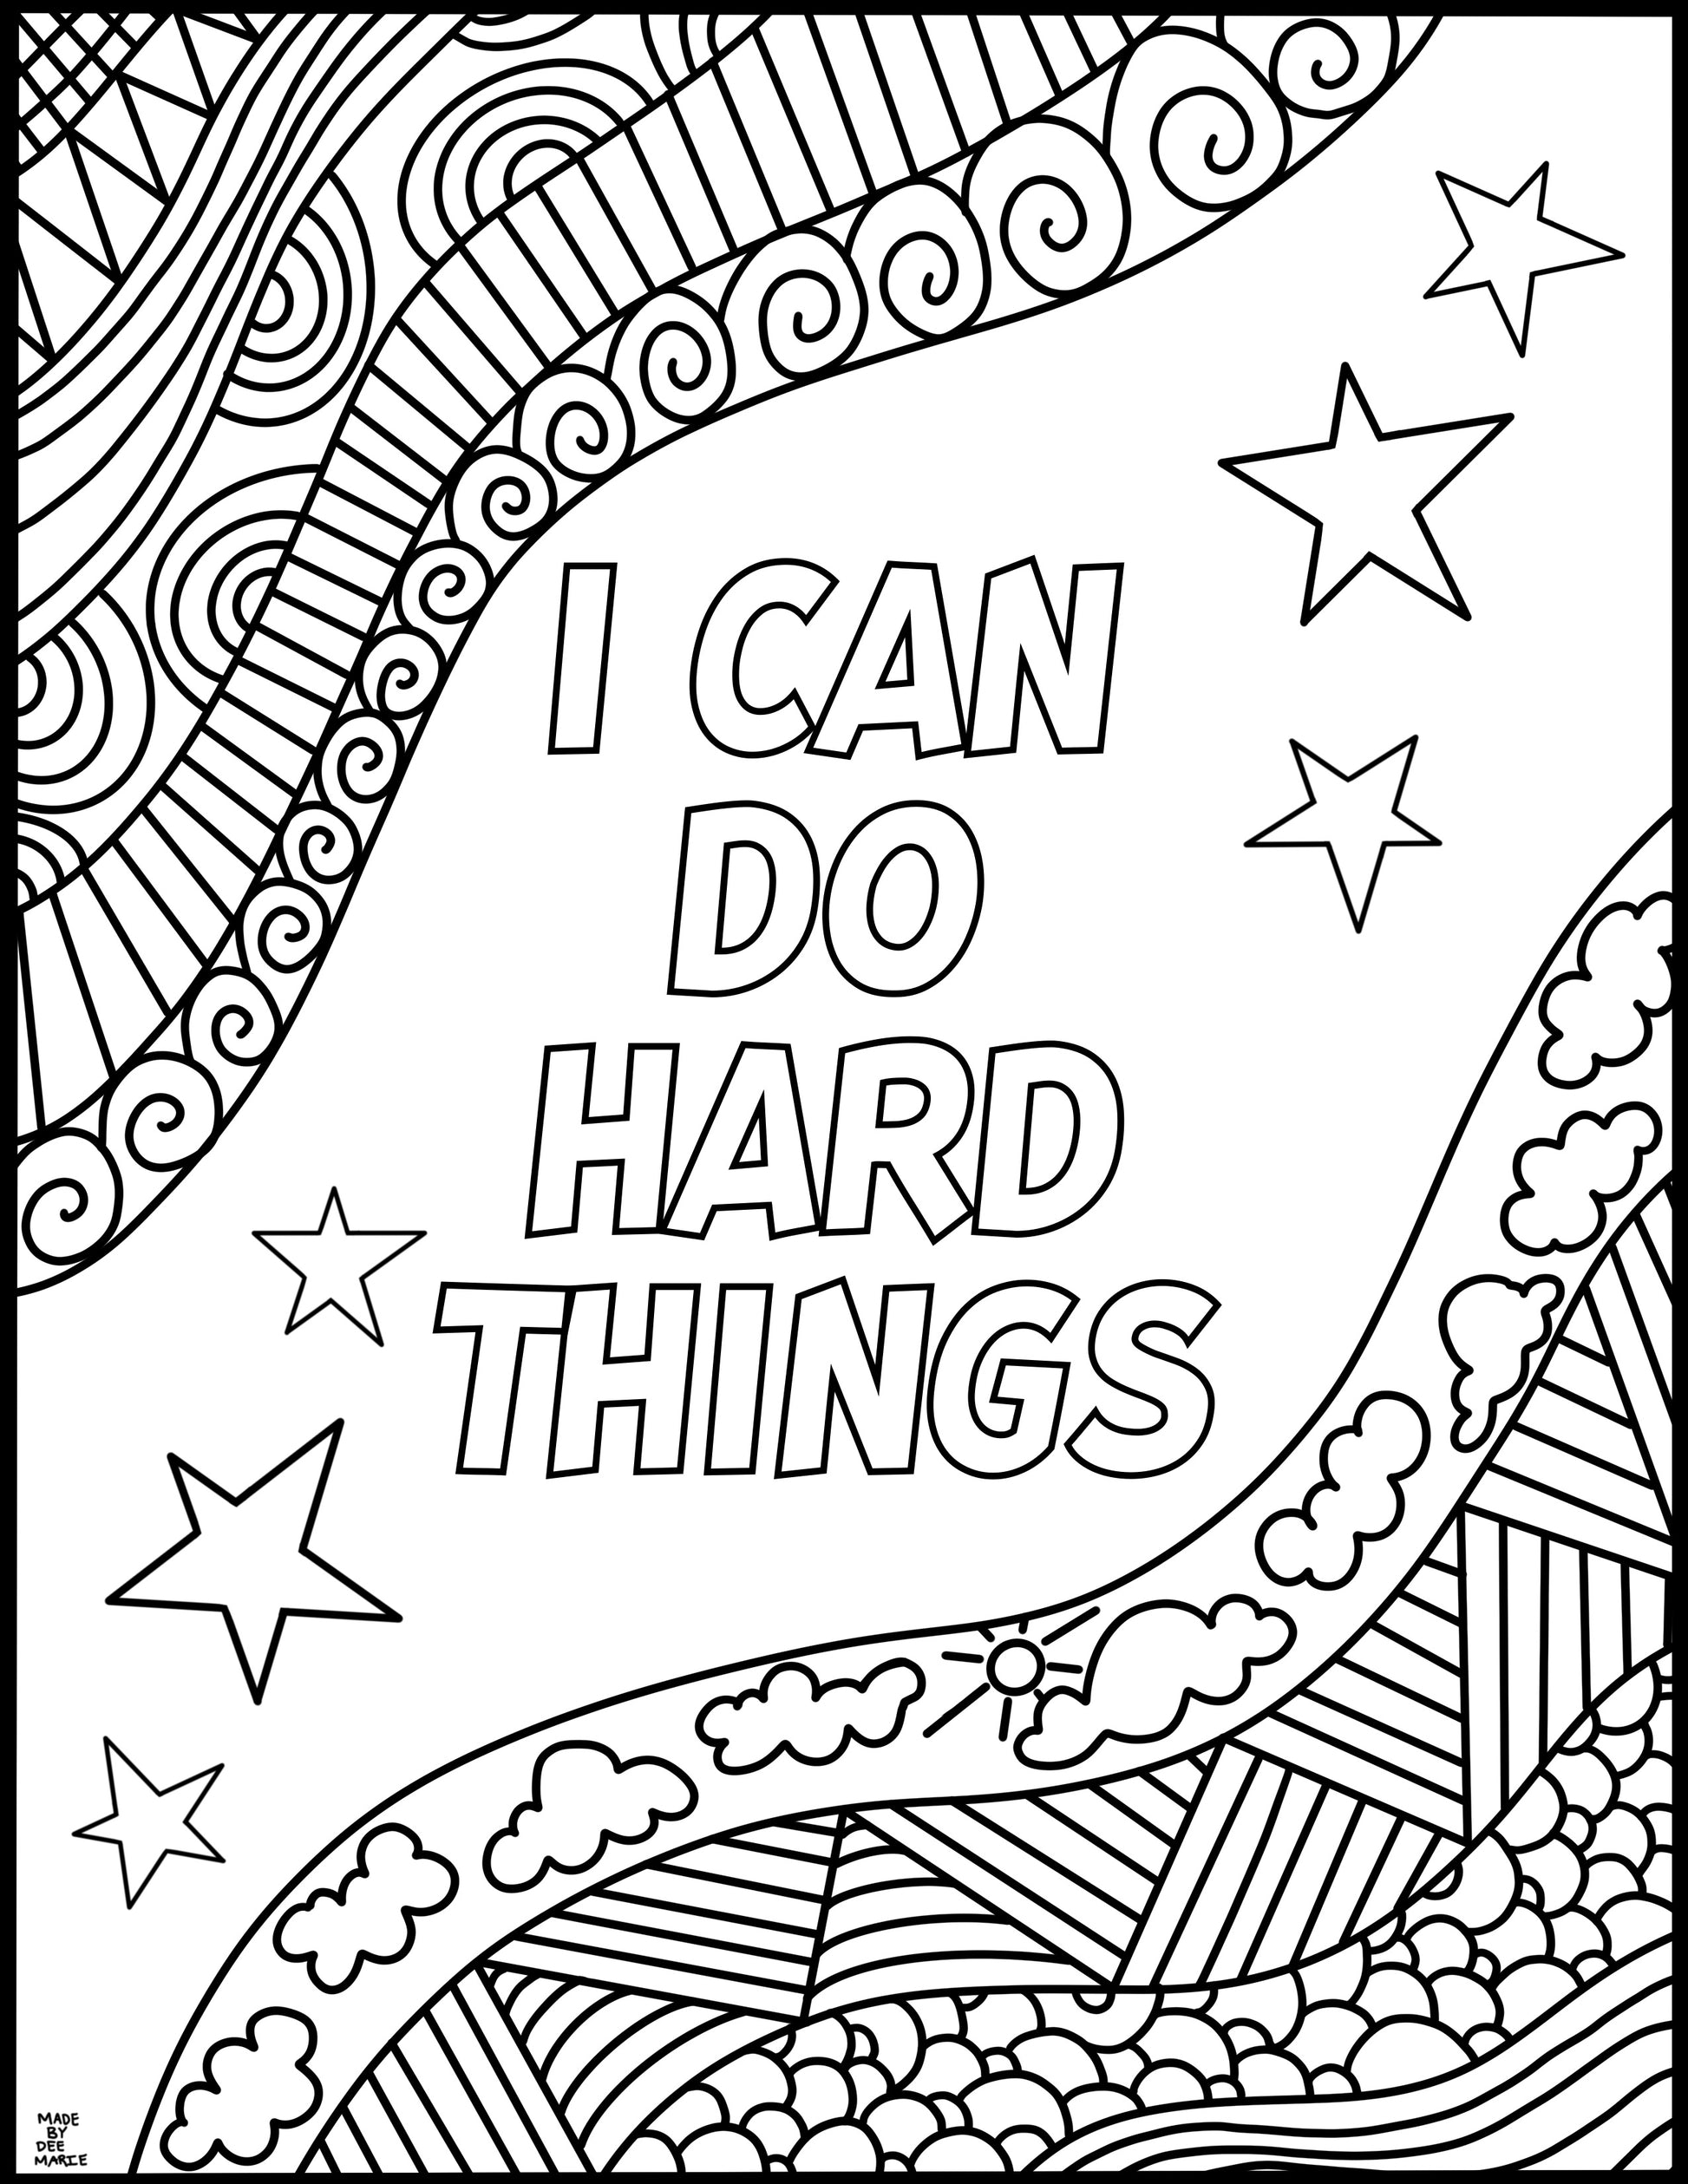 I Can Do Hard Things Coloring Page-Digital Download – madebydeemarie